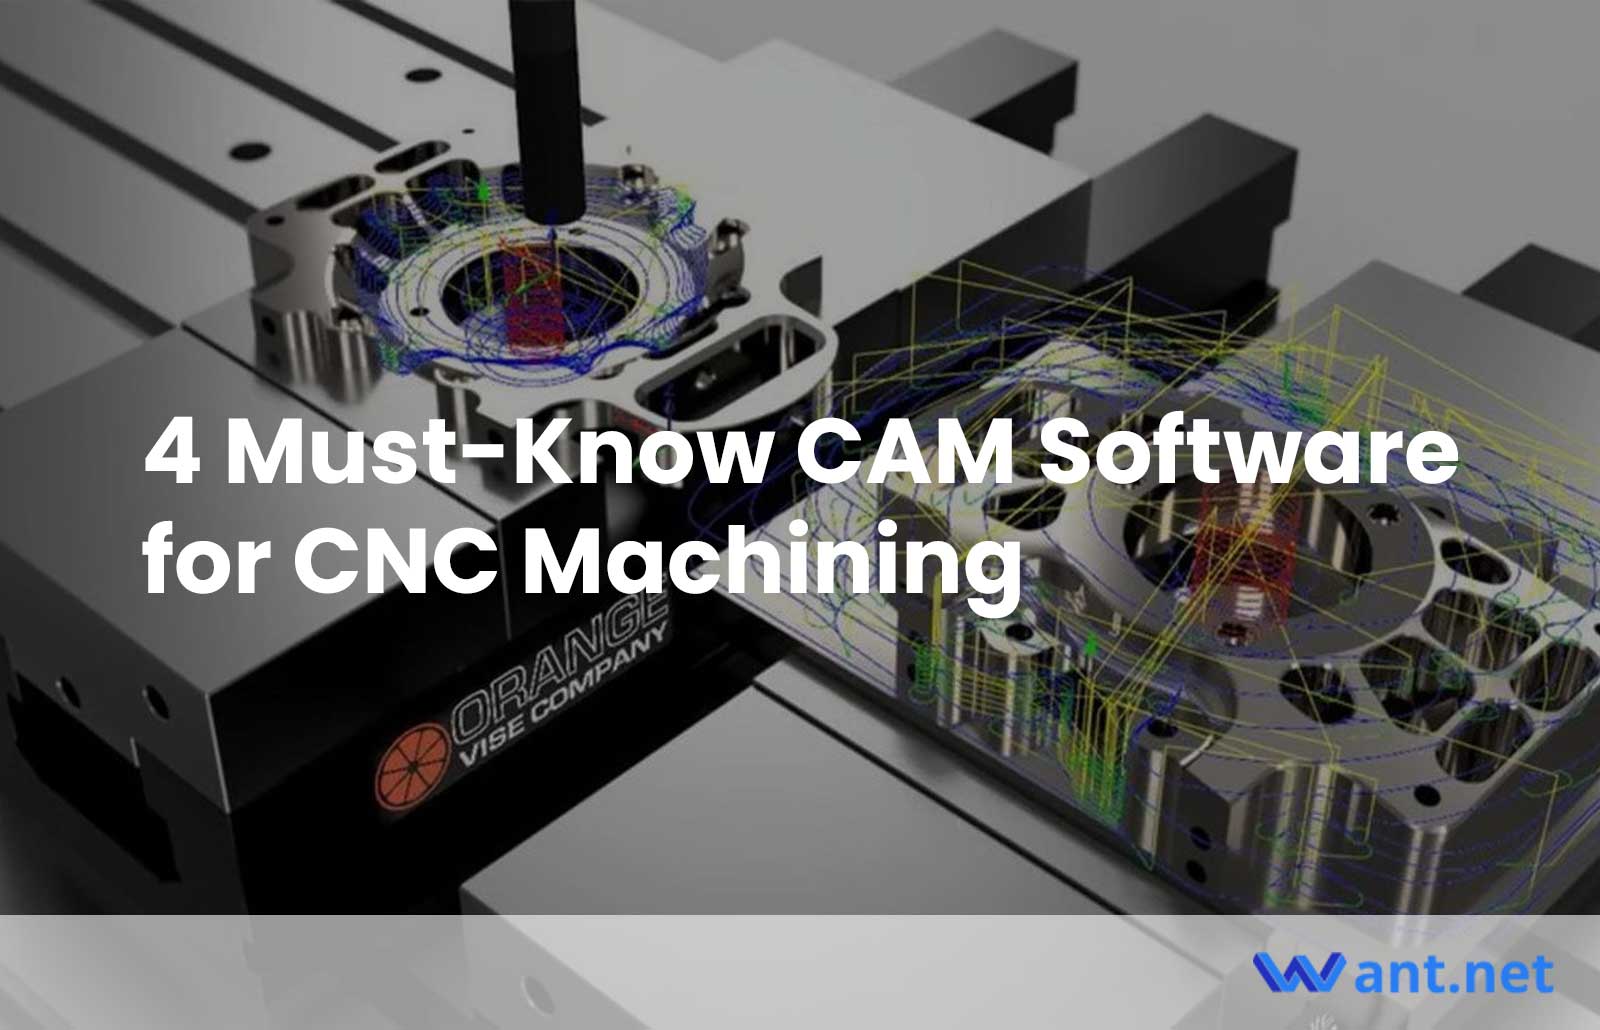 4 Must-Know CAM Software for CNC Machining